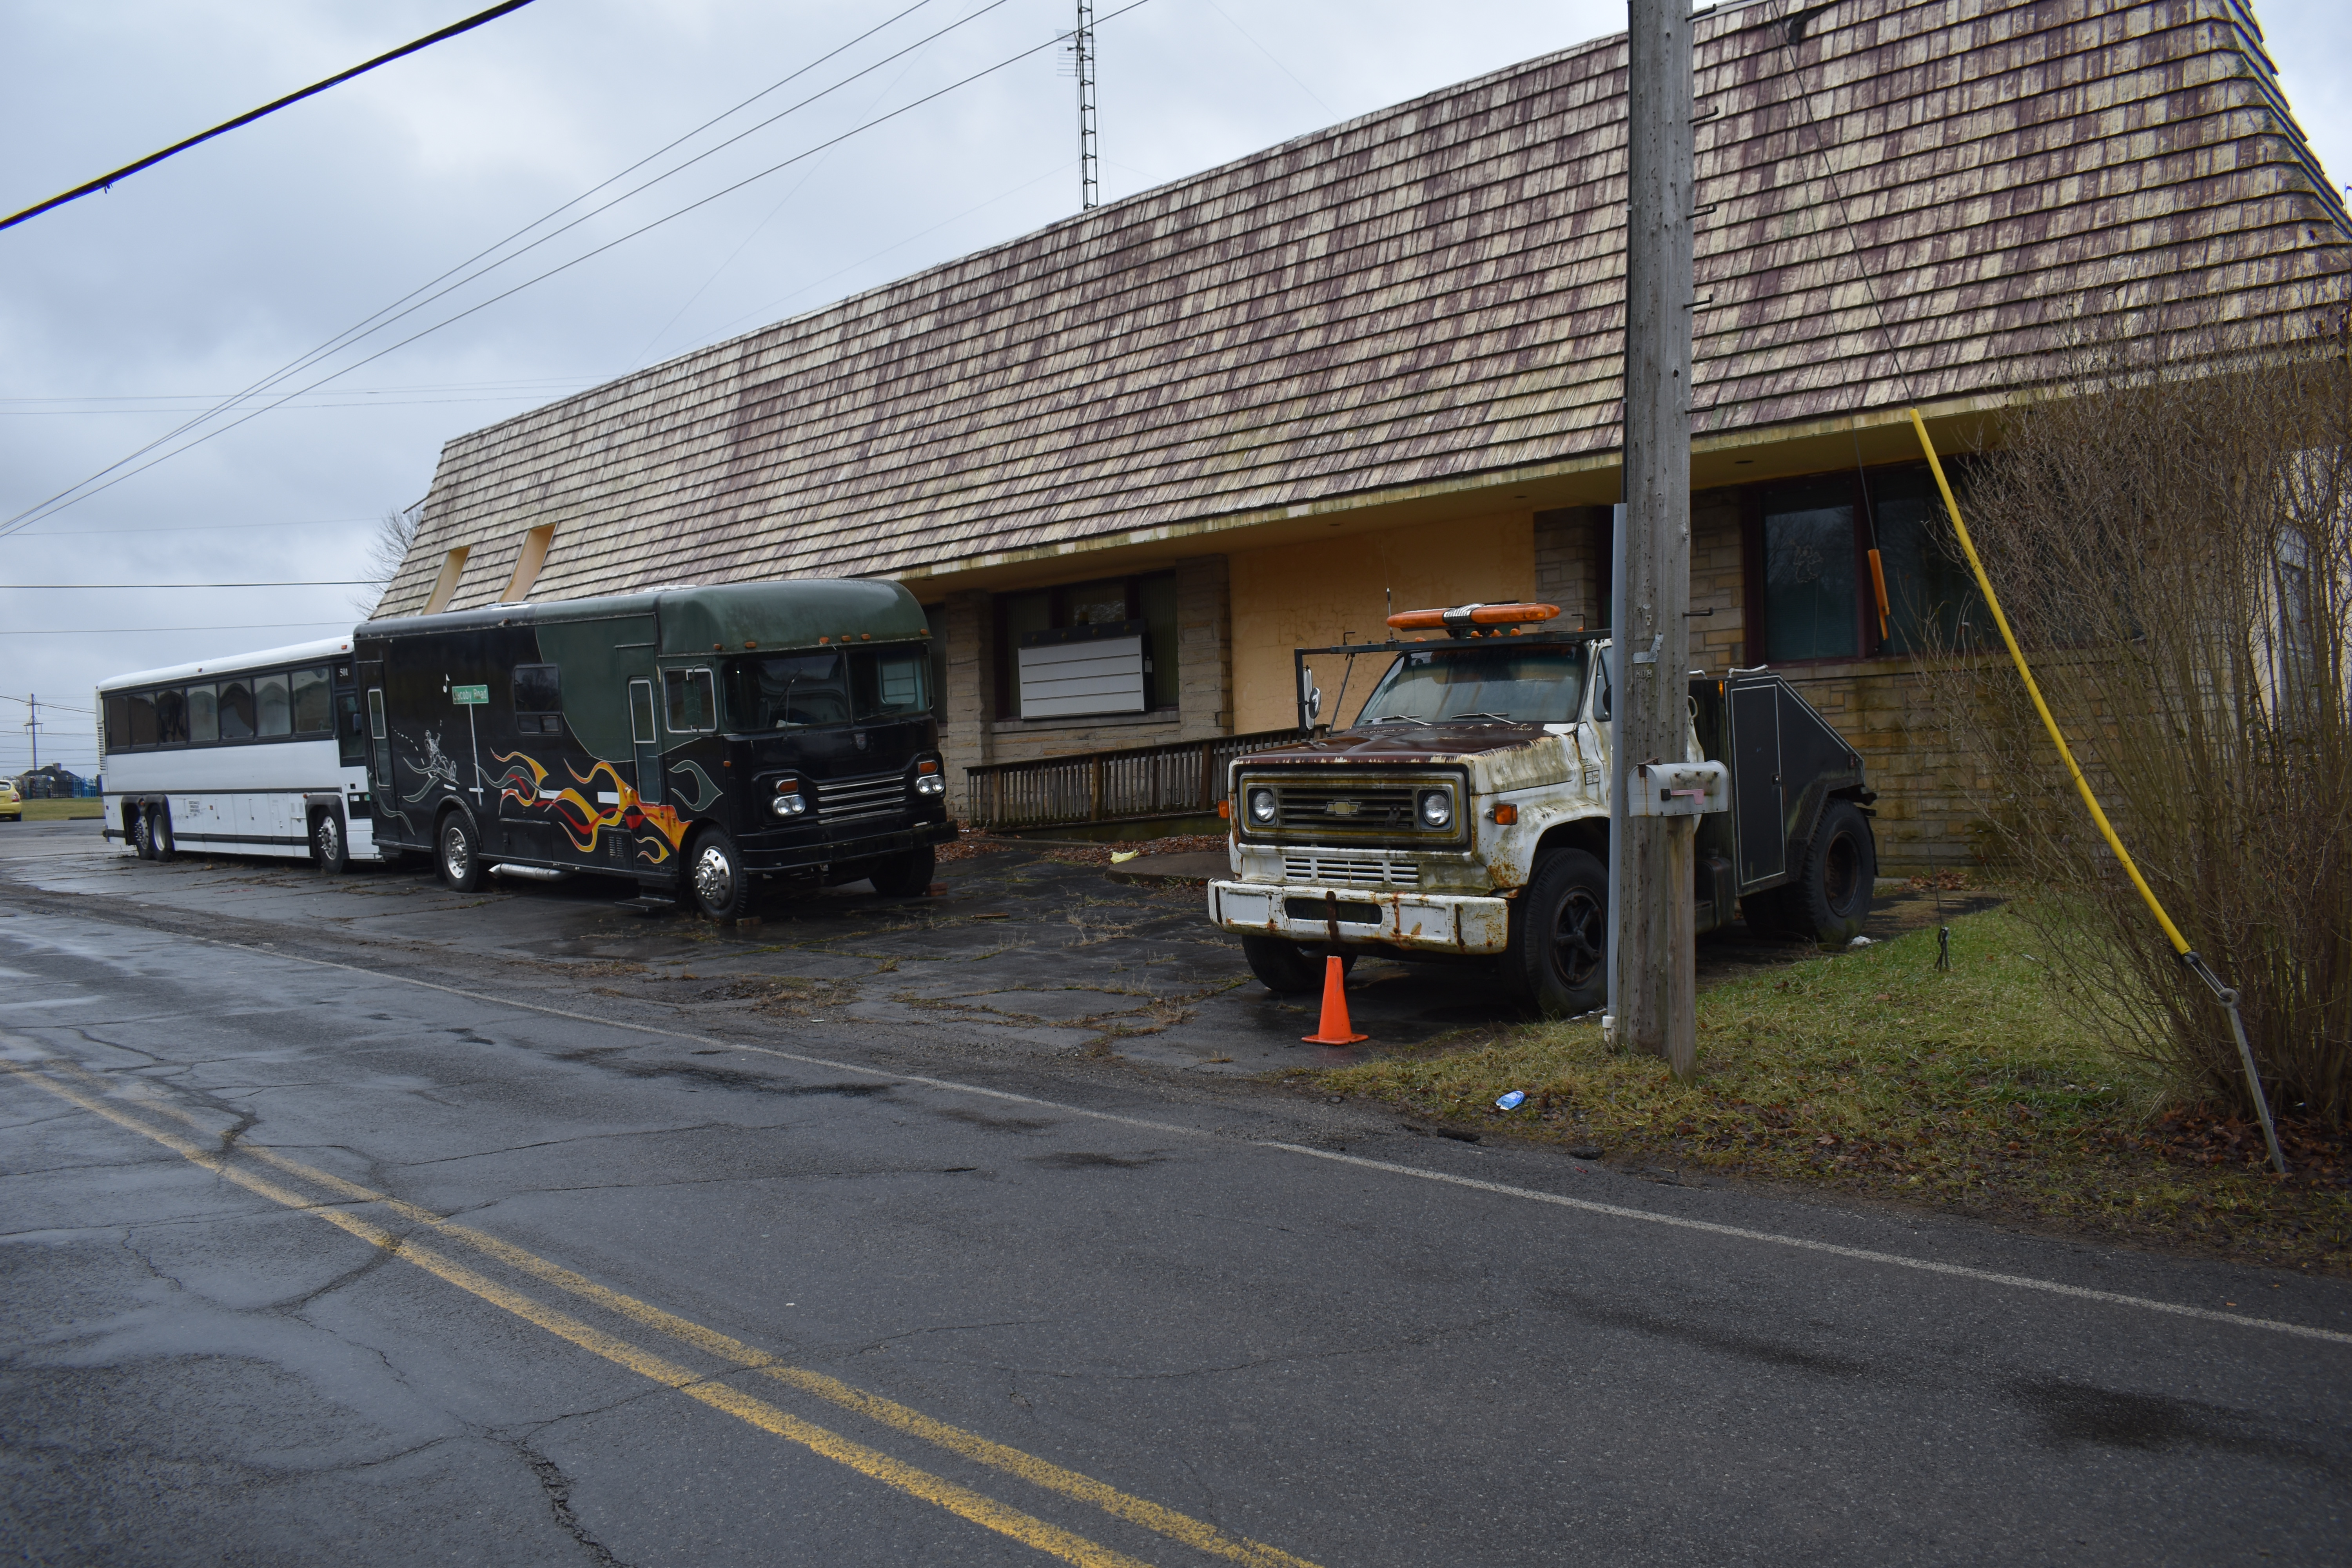 The Merchant property, formerly Schuster's Restaurant, in Masury is one that has come under scrutiny by township officials for alleged violations of the Exterior Property Maintenance Code.